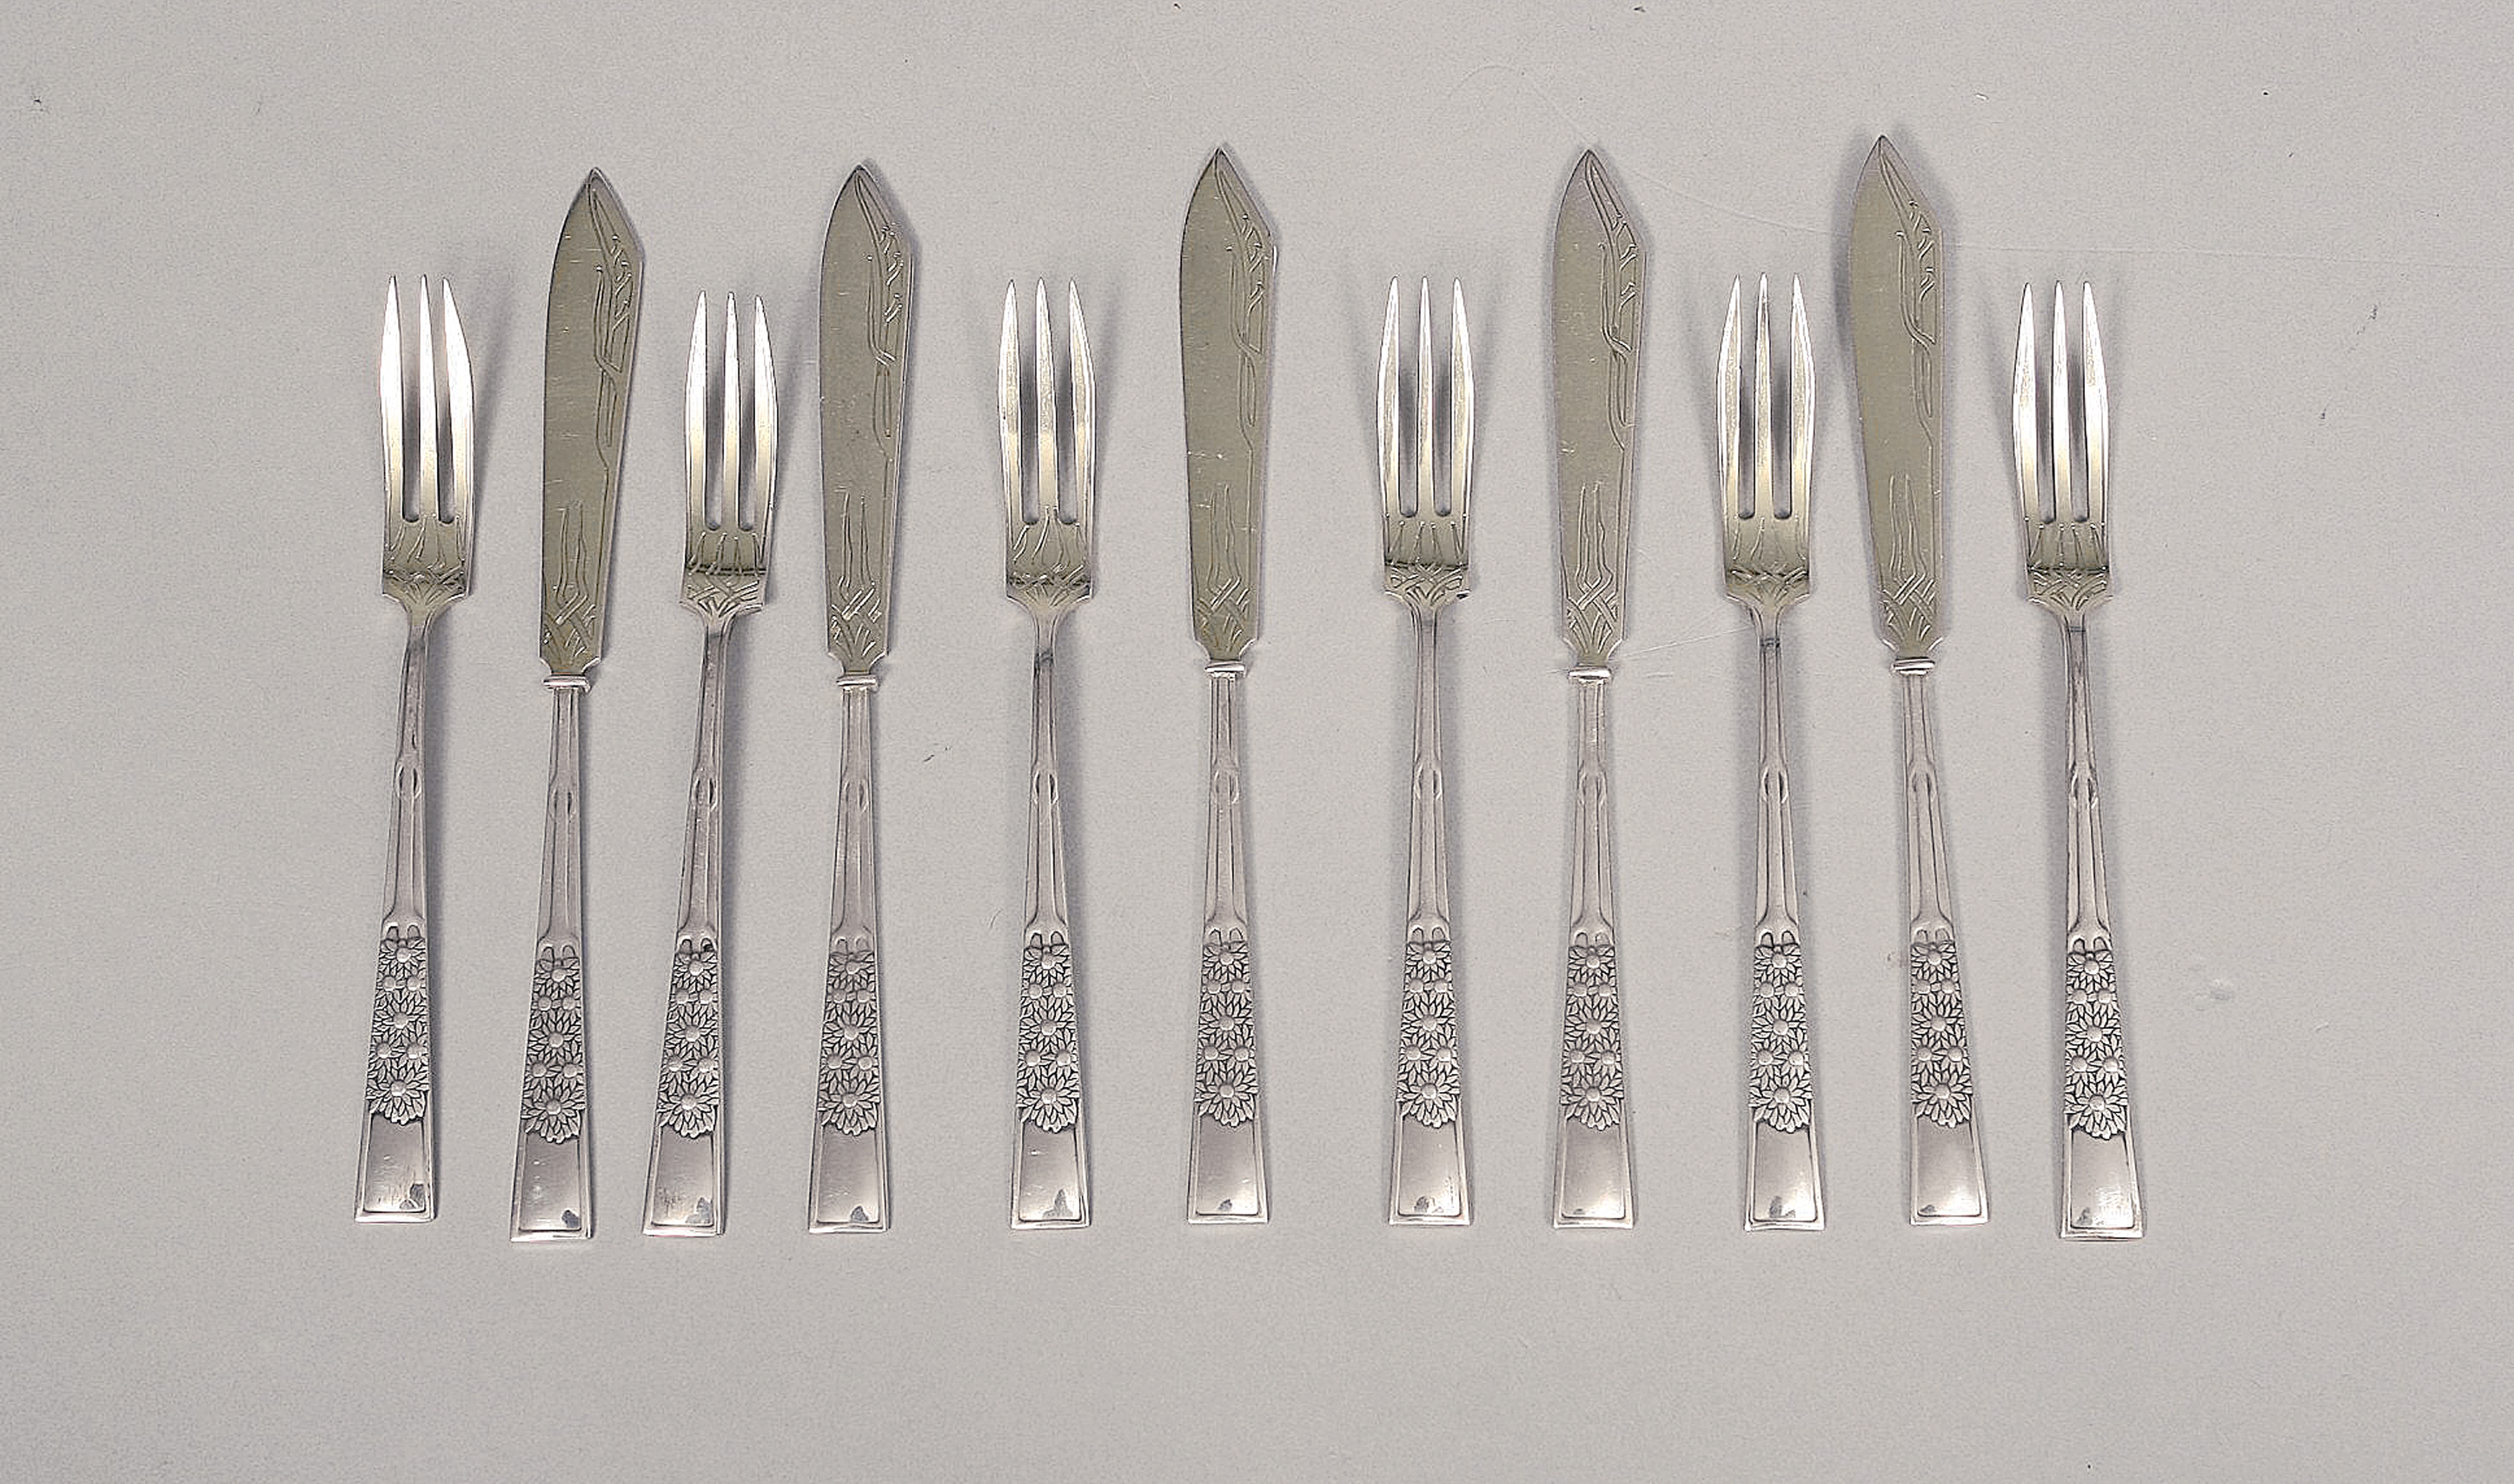 A rare Art-Nouveau cutlery with marguerite ornament by Wilkens & Söhne